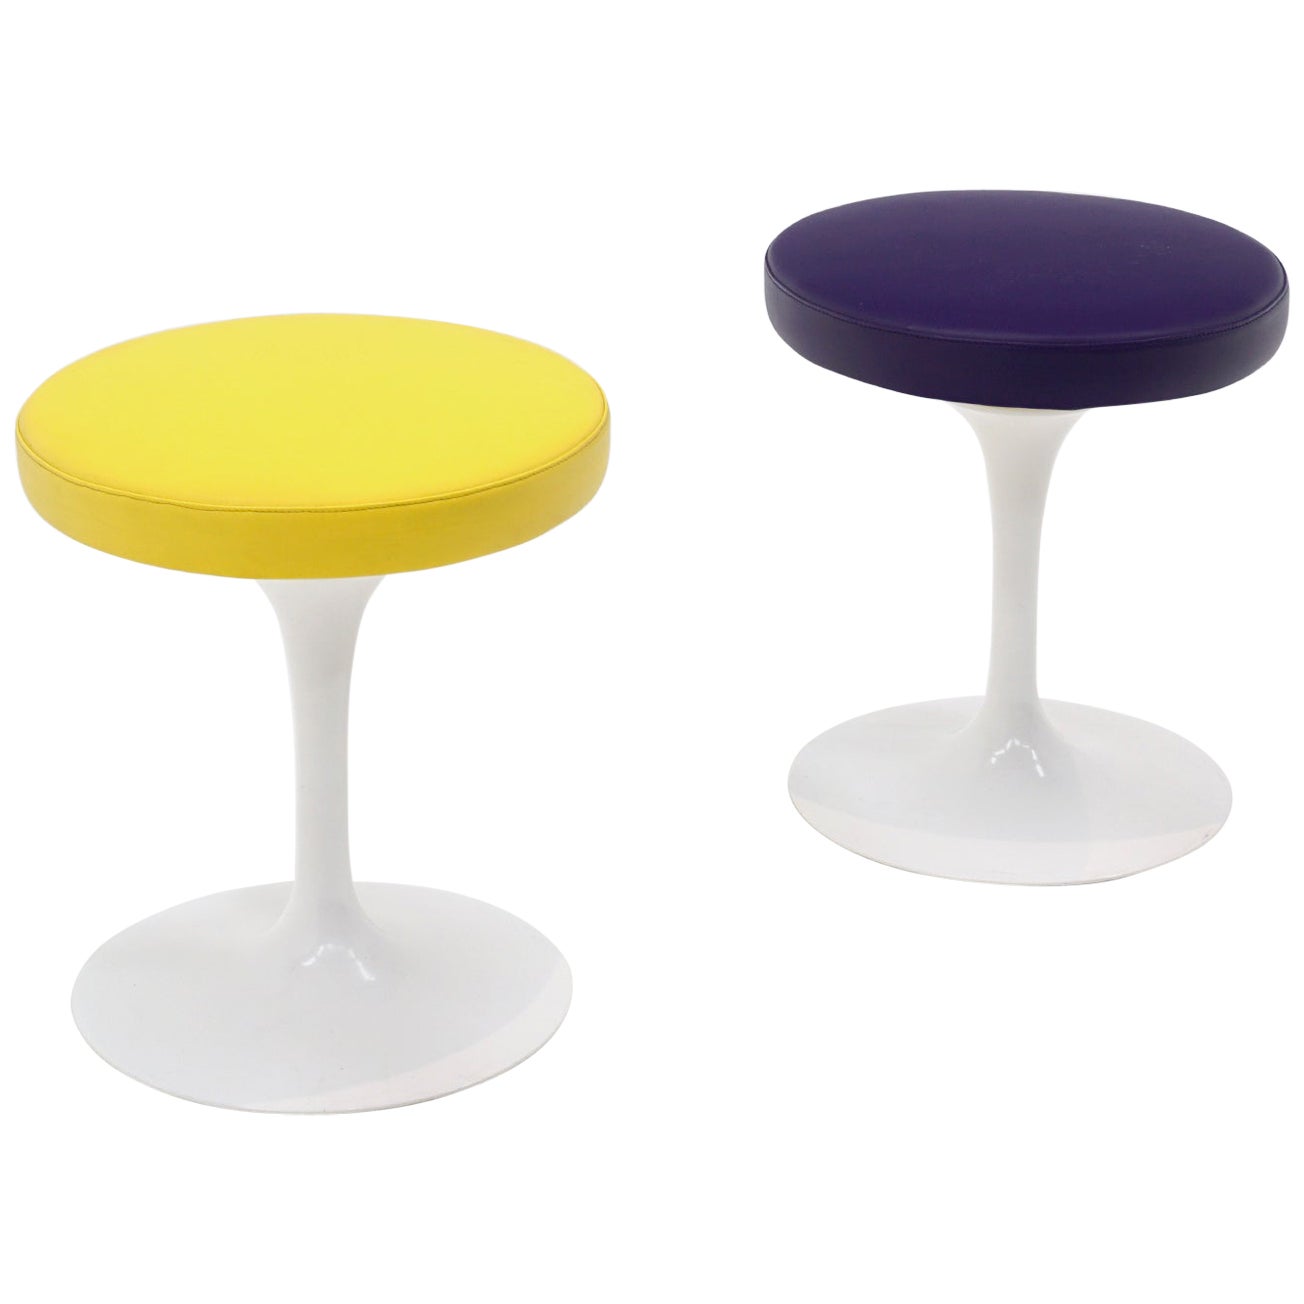 Two Swivel Tulip Stools by Eero Saarinen for Knoll, Yellow and Purple, Signed For Sale